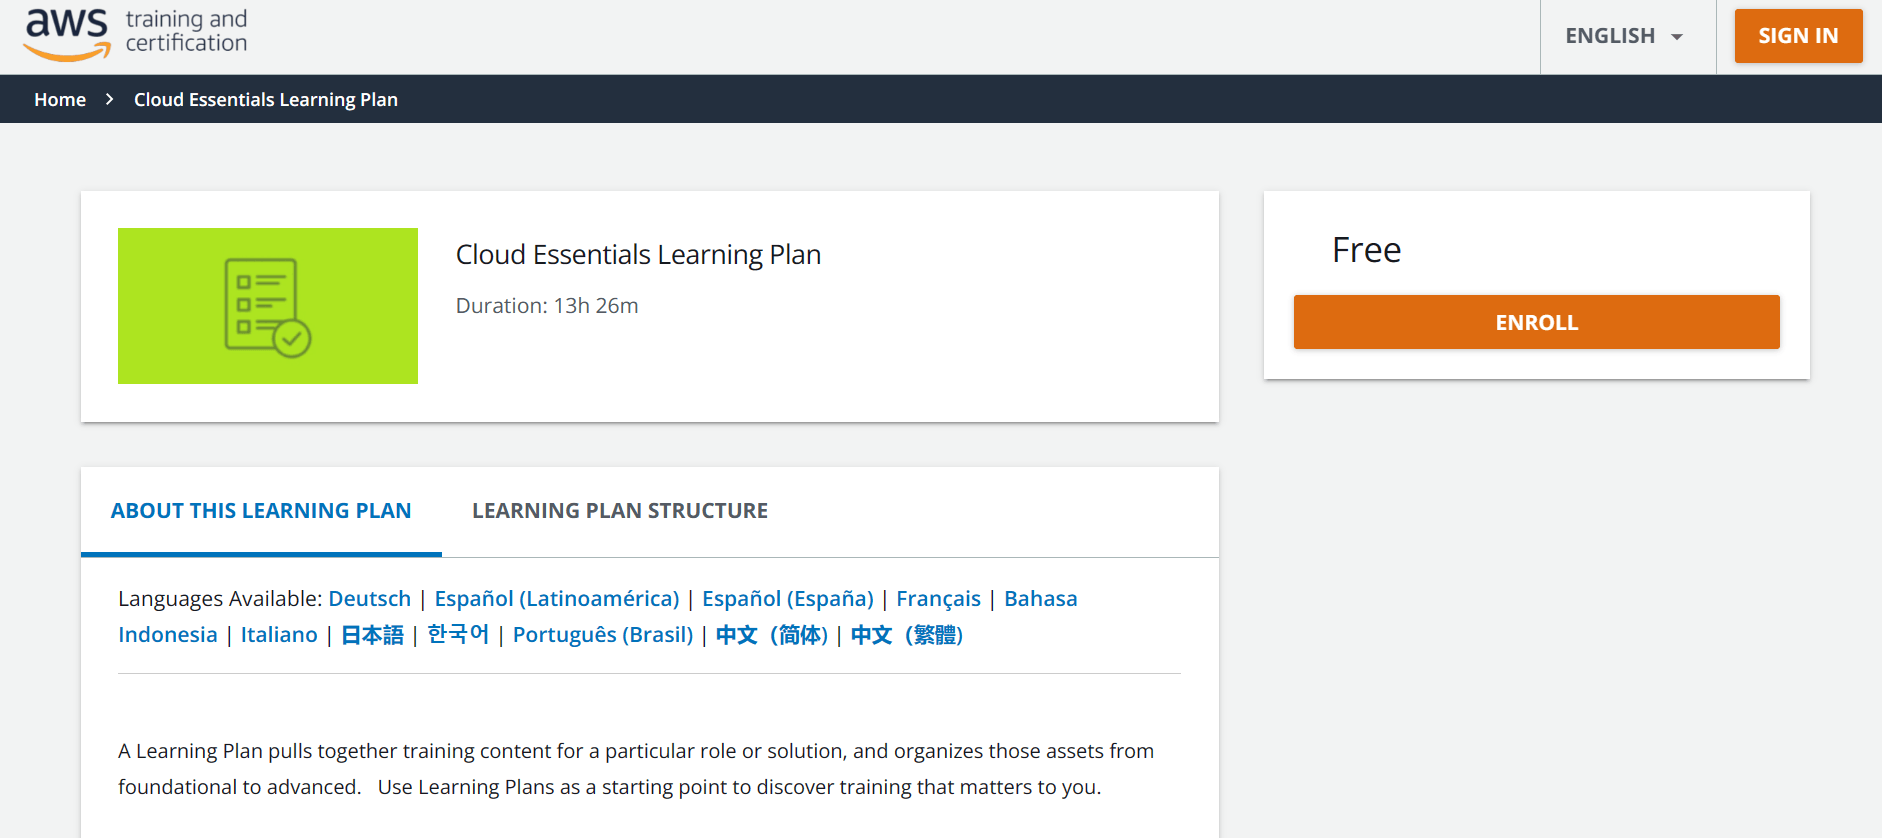 AWS Cloud Essentials Learning Plan details